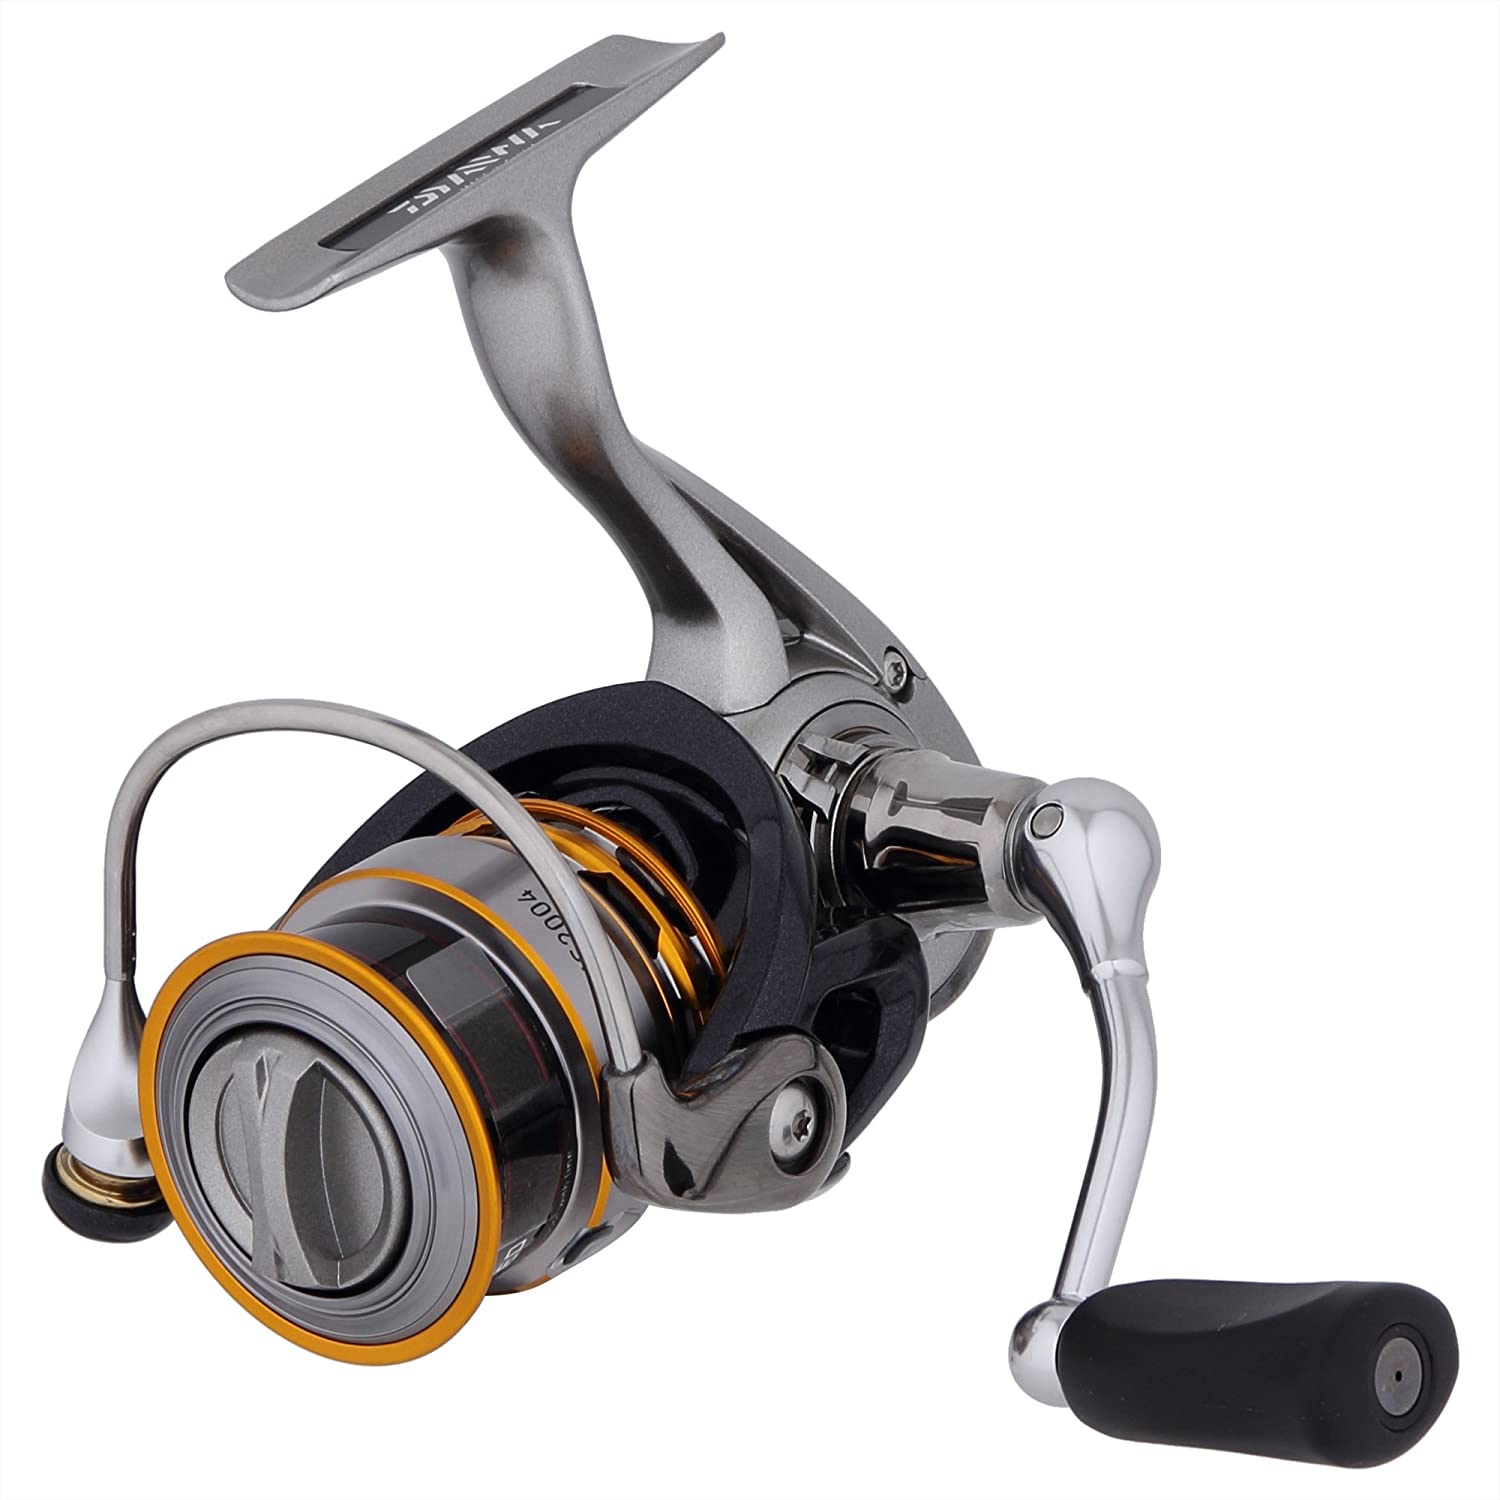 DAIWA Spinning Reel 16 EM MS 2004 (2000 size) - Discovery Japan Mall